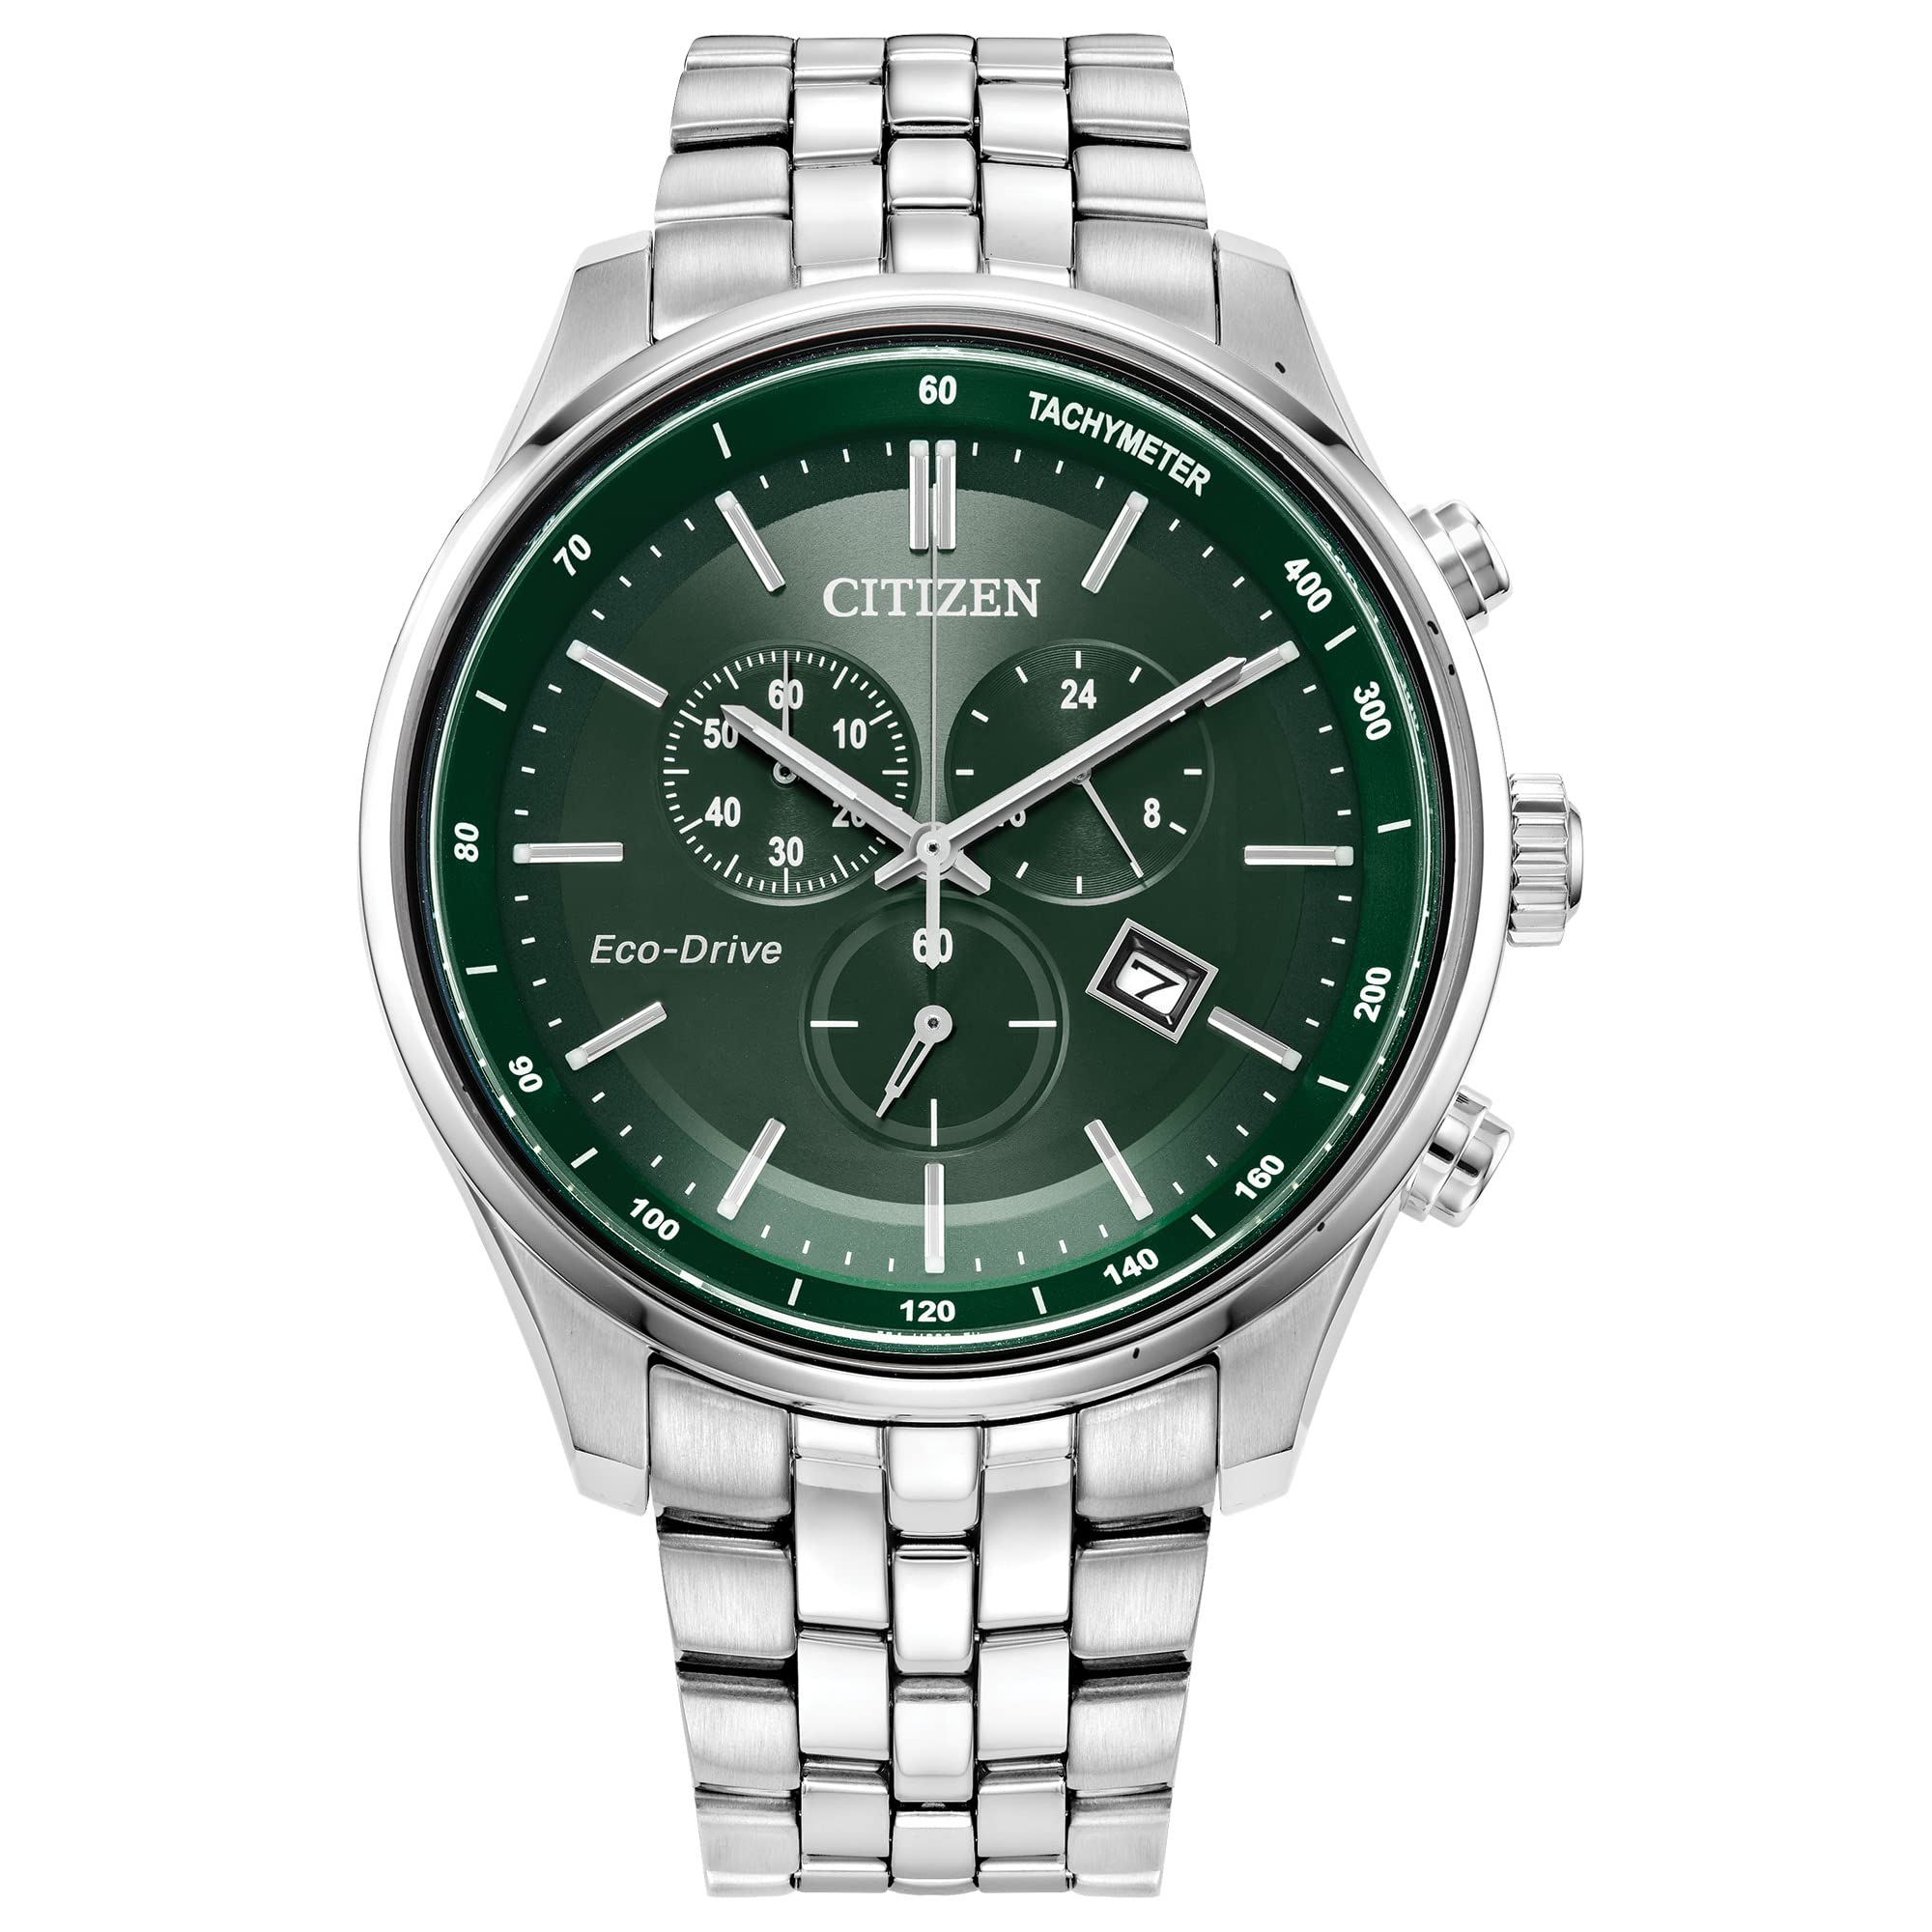 Citizen Men's Classic Corso Eco-Drive Watch, Chronograph, 12/24 Hour Time, Date, Sapphire Crystal, Stainless/Green Dial